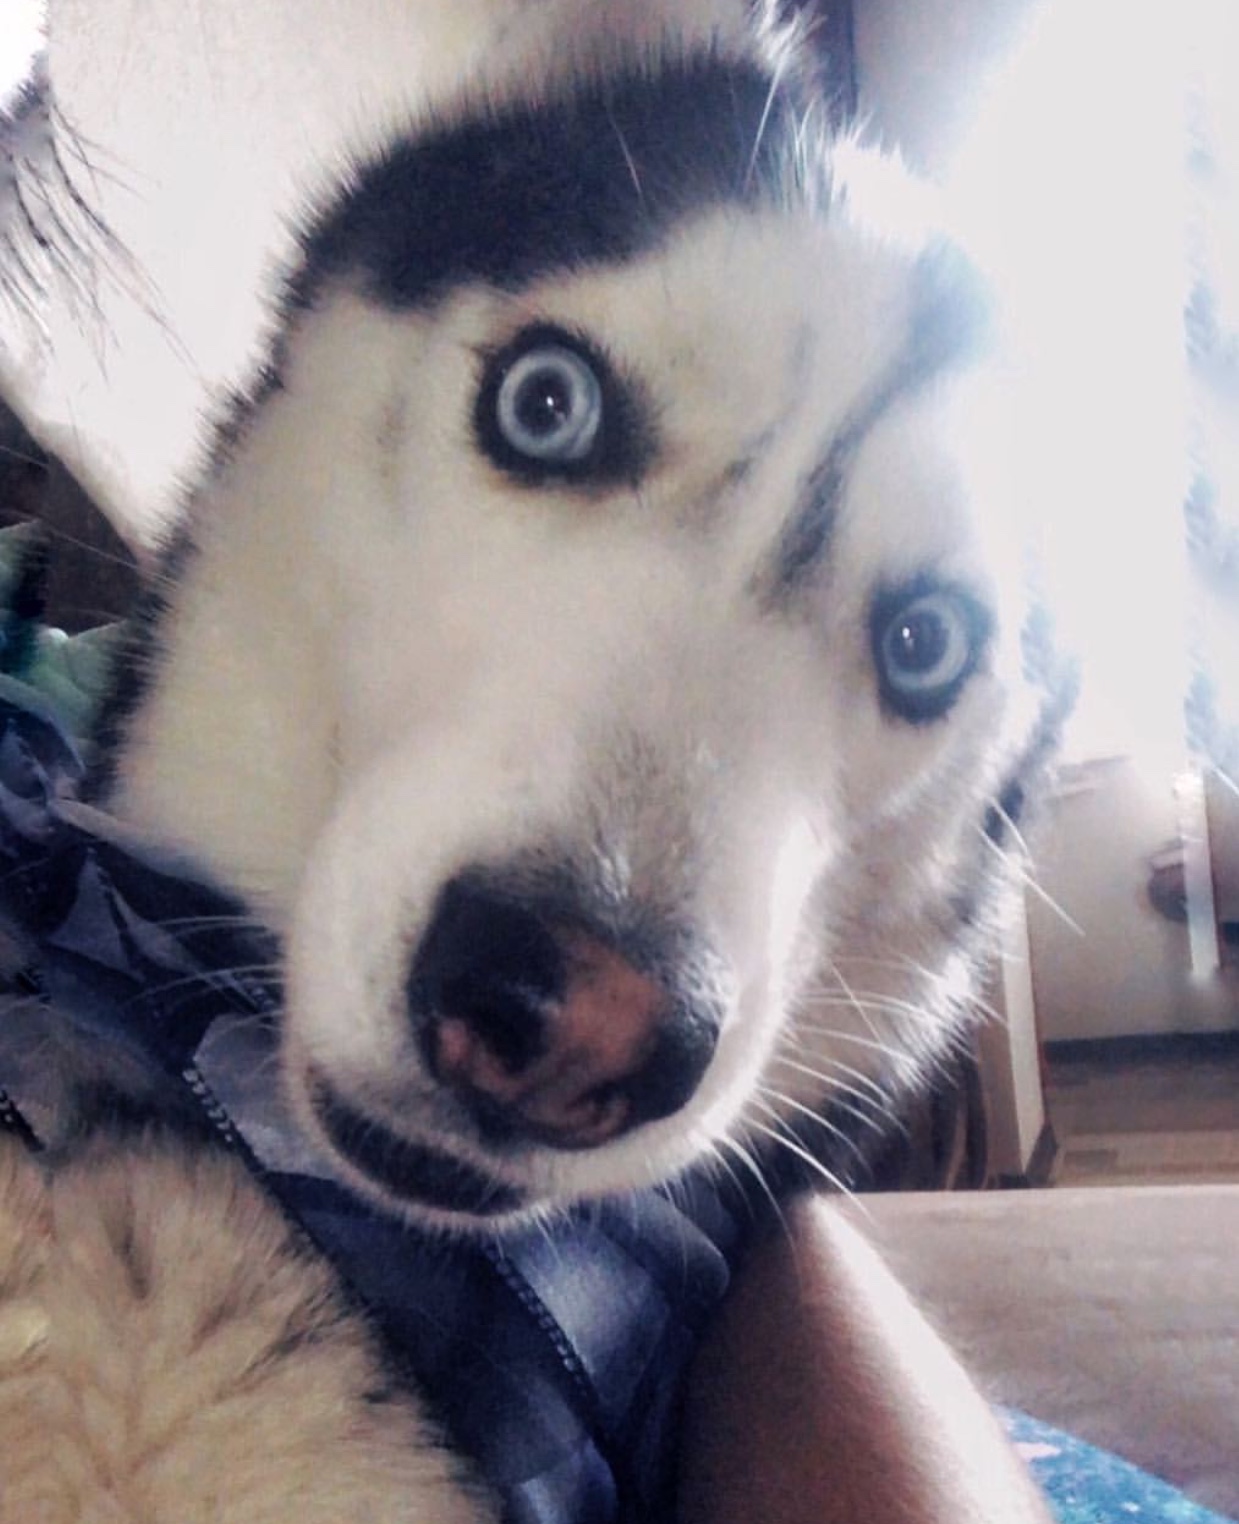 A Husky in the arms of the person while staring